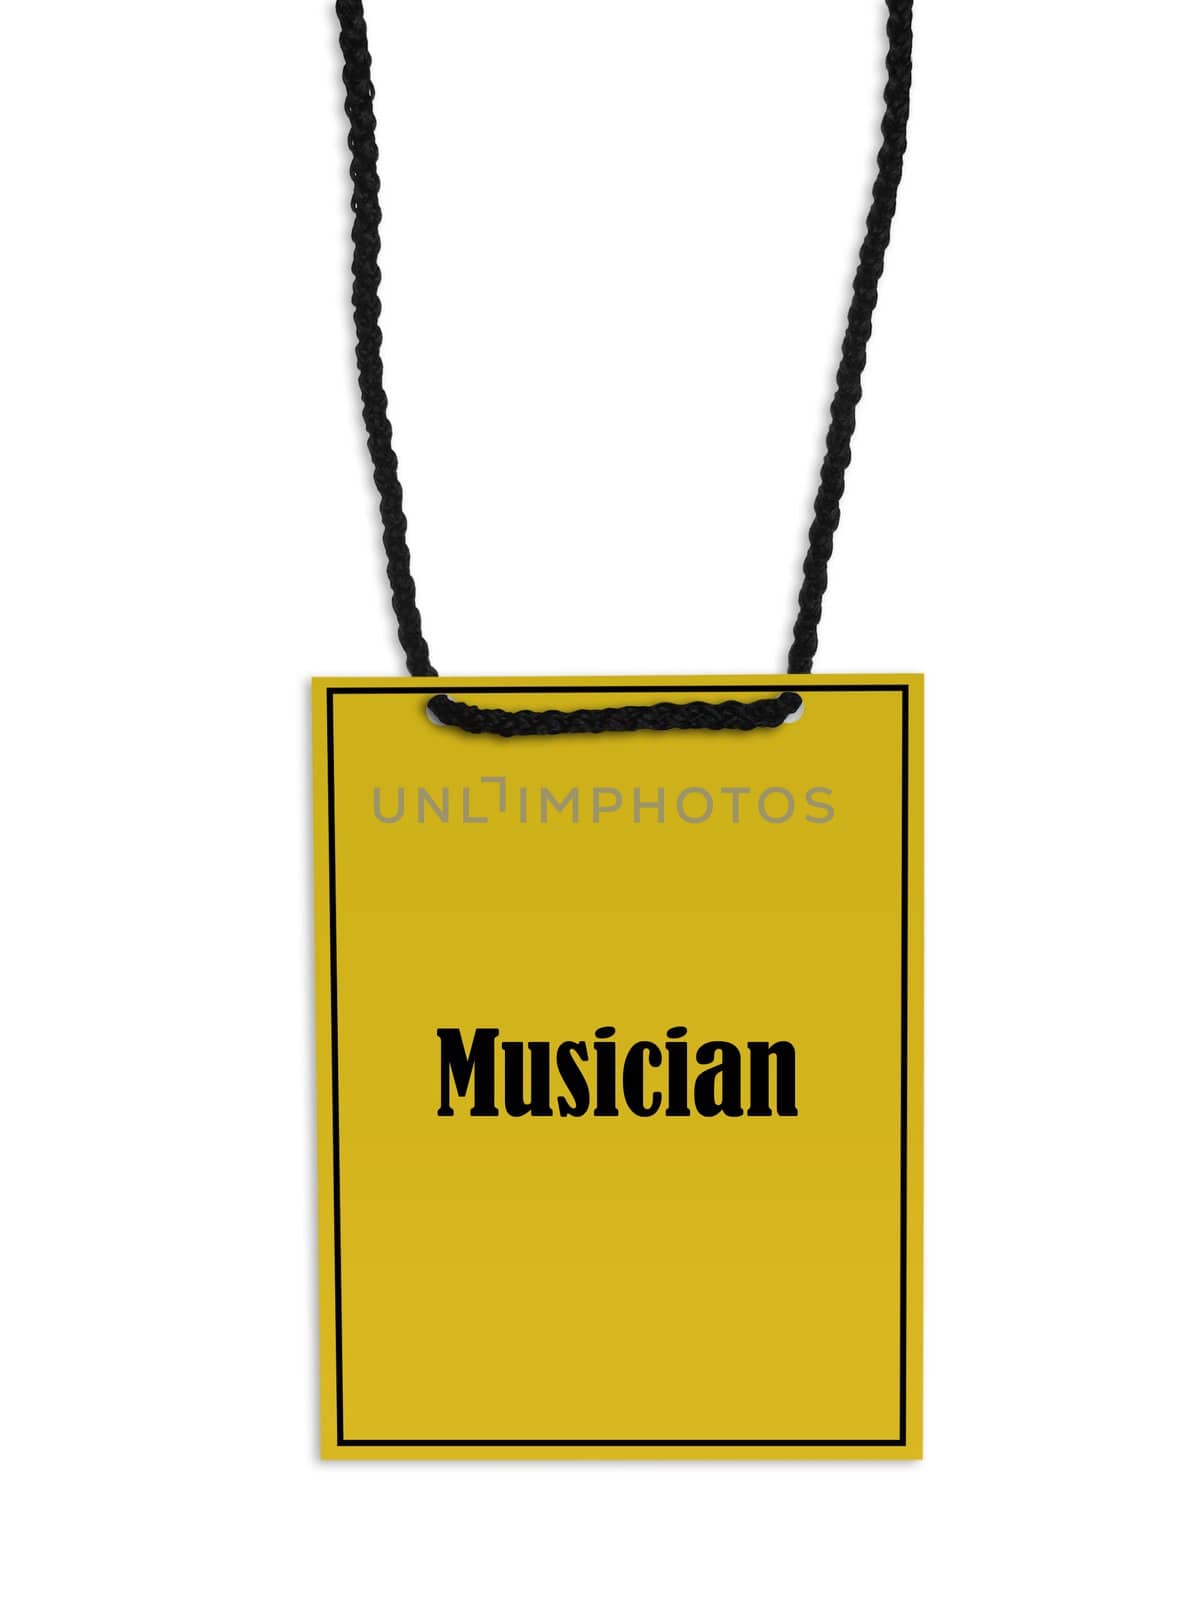 Musician stage pass on white background.